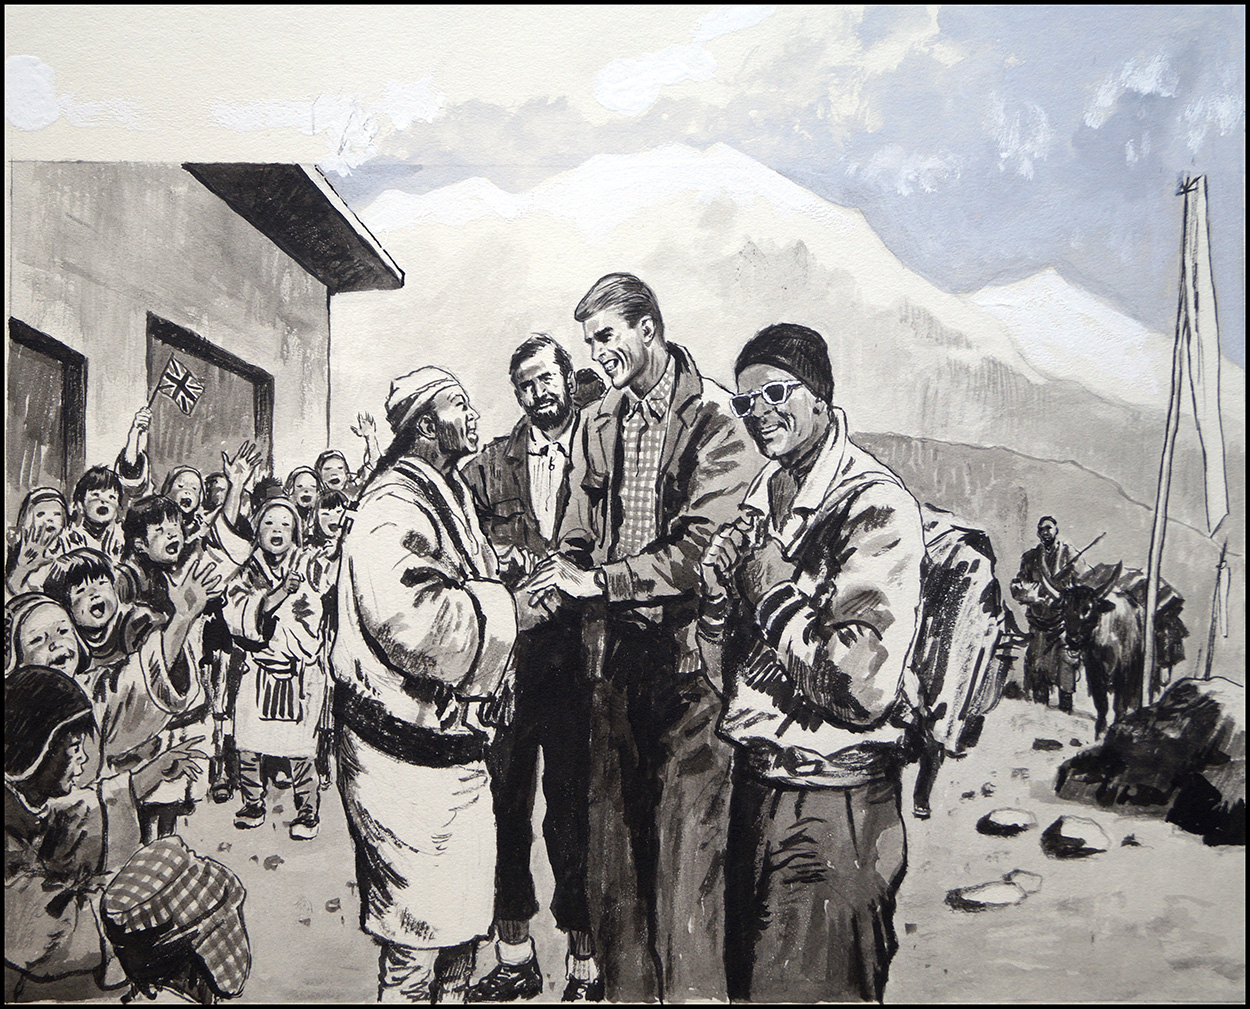 Sir Edmund Hillary returning to the Himalayas (Original) art by Alexander Oliphant at The Illustration Art Gallery